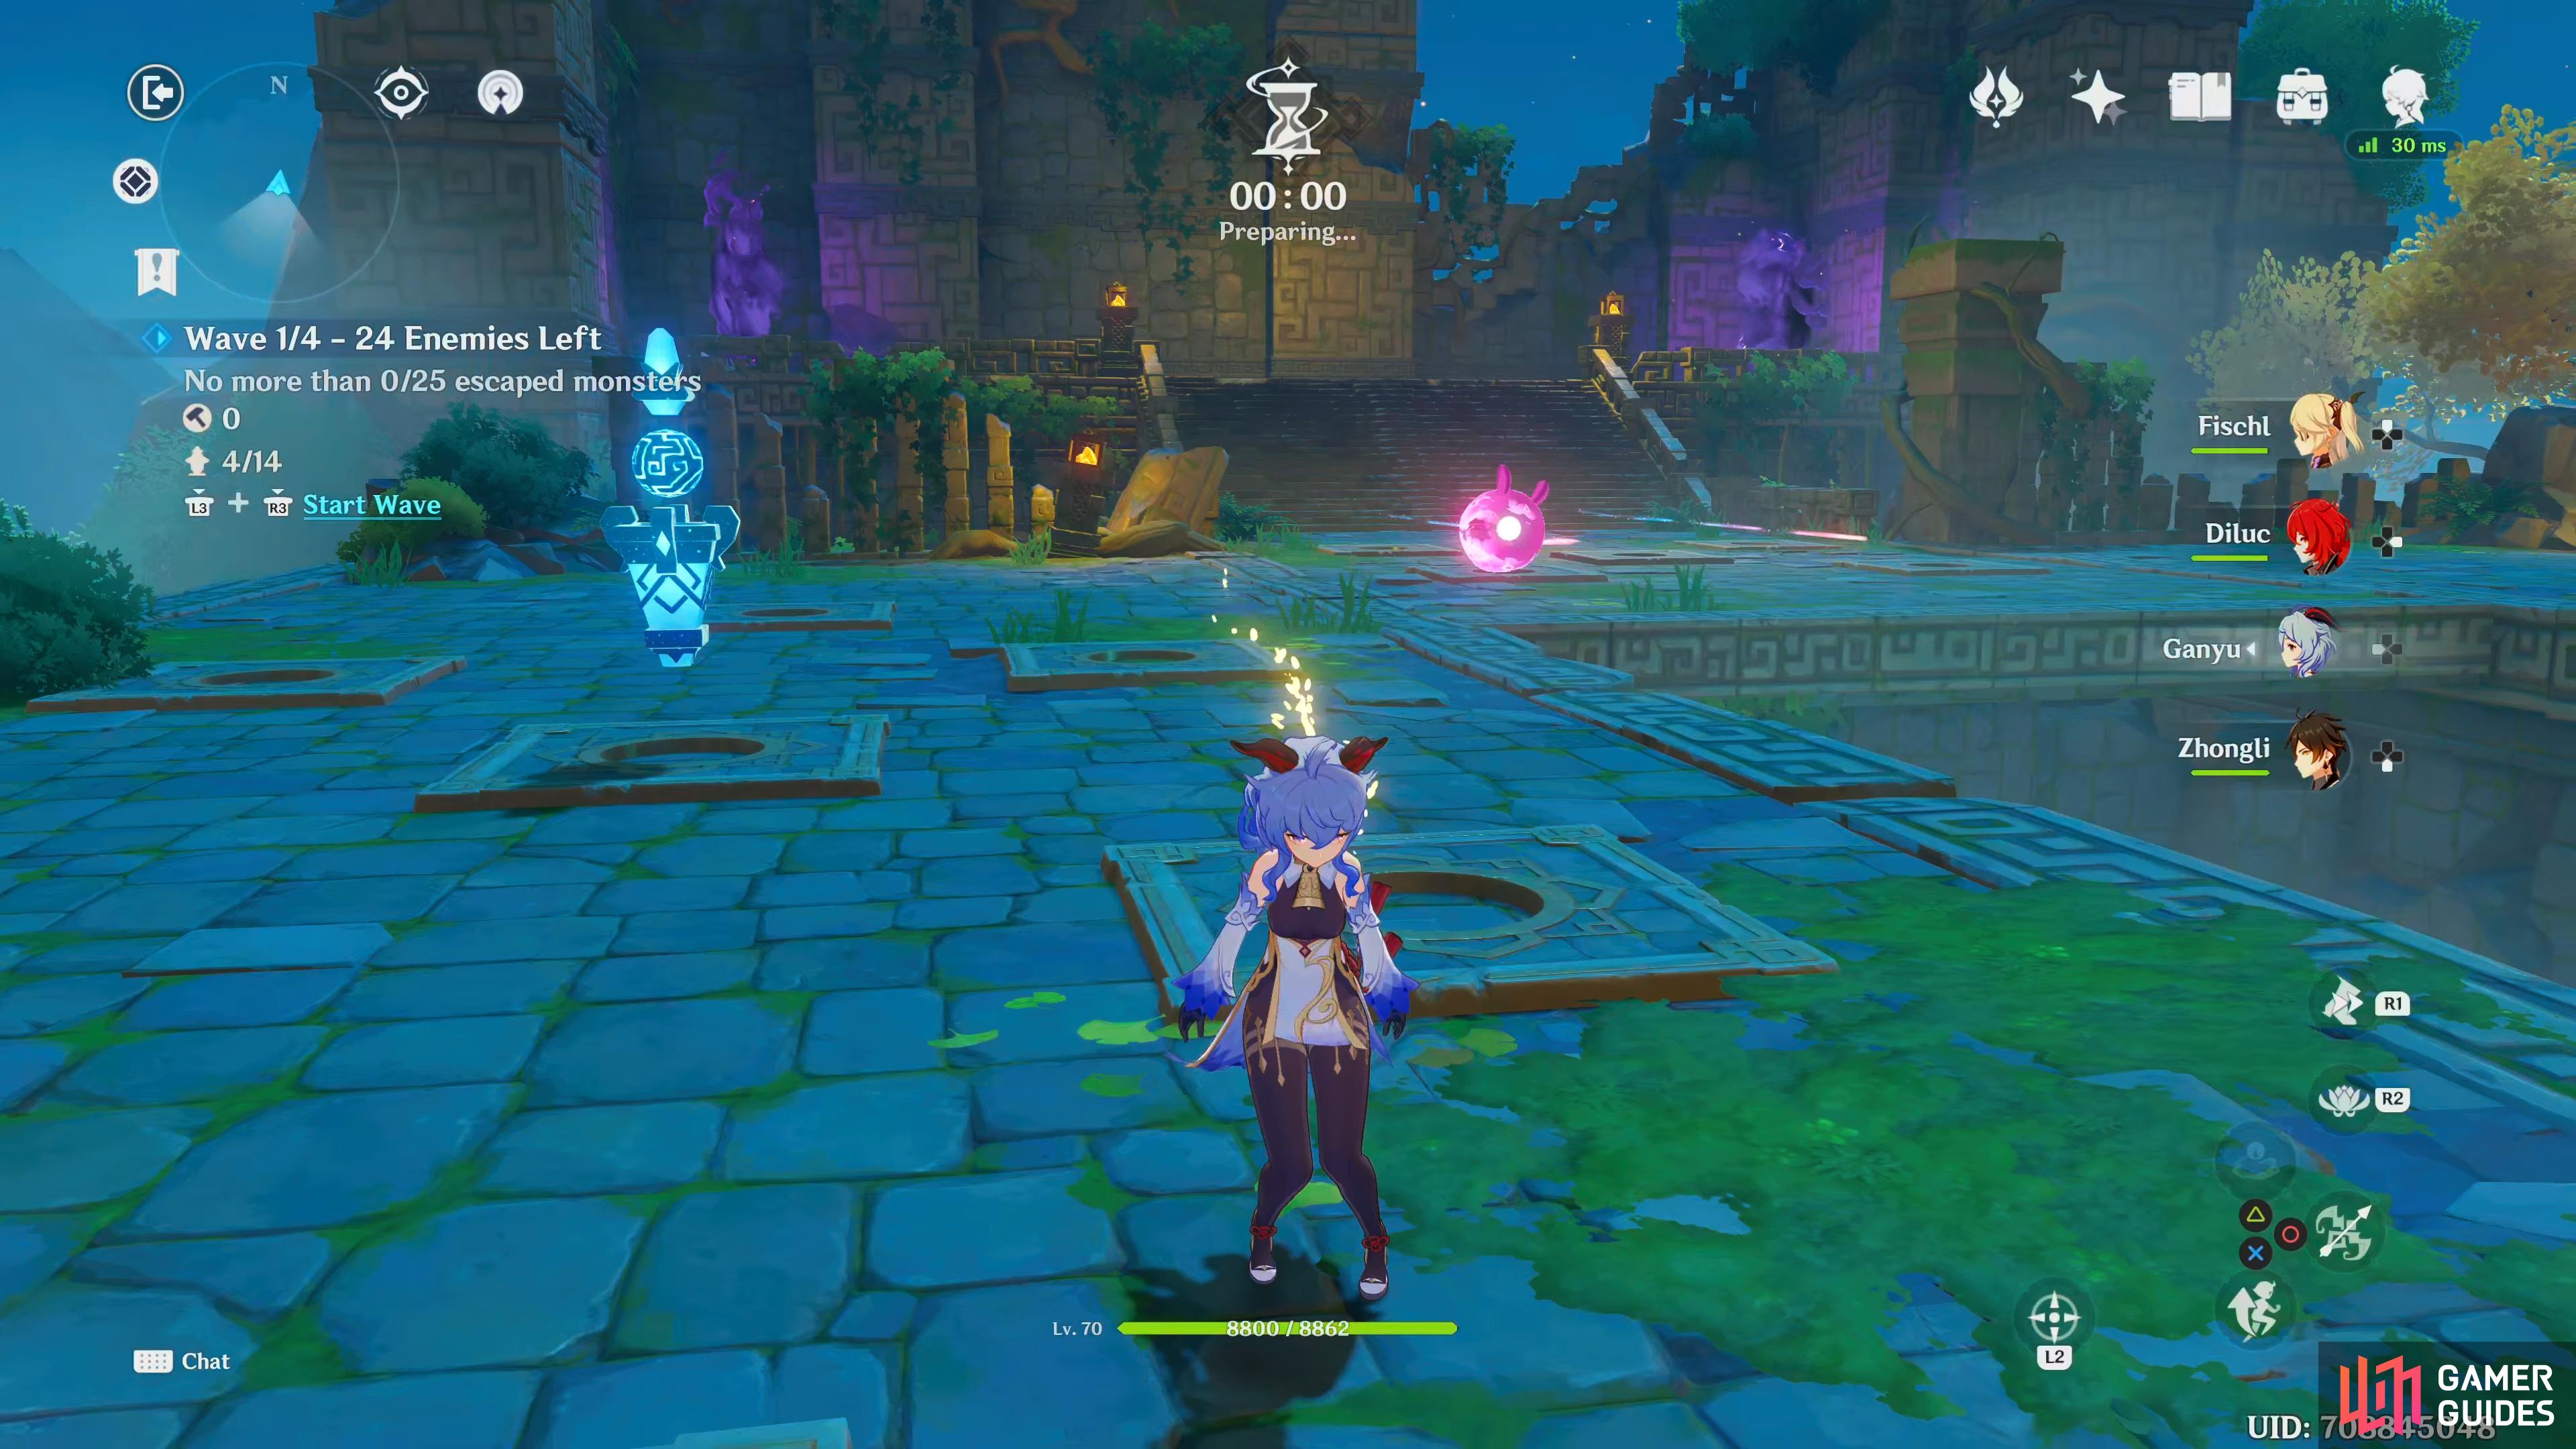 The enemies come from the purple portals, the location changes depending on the stage